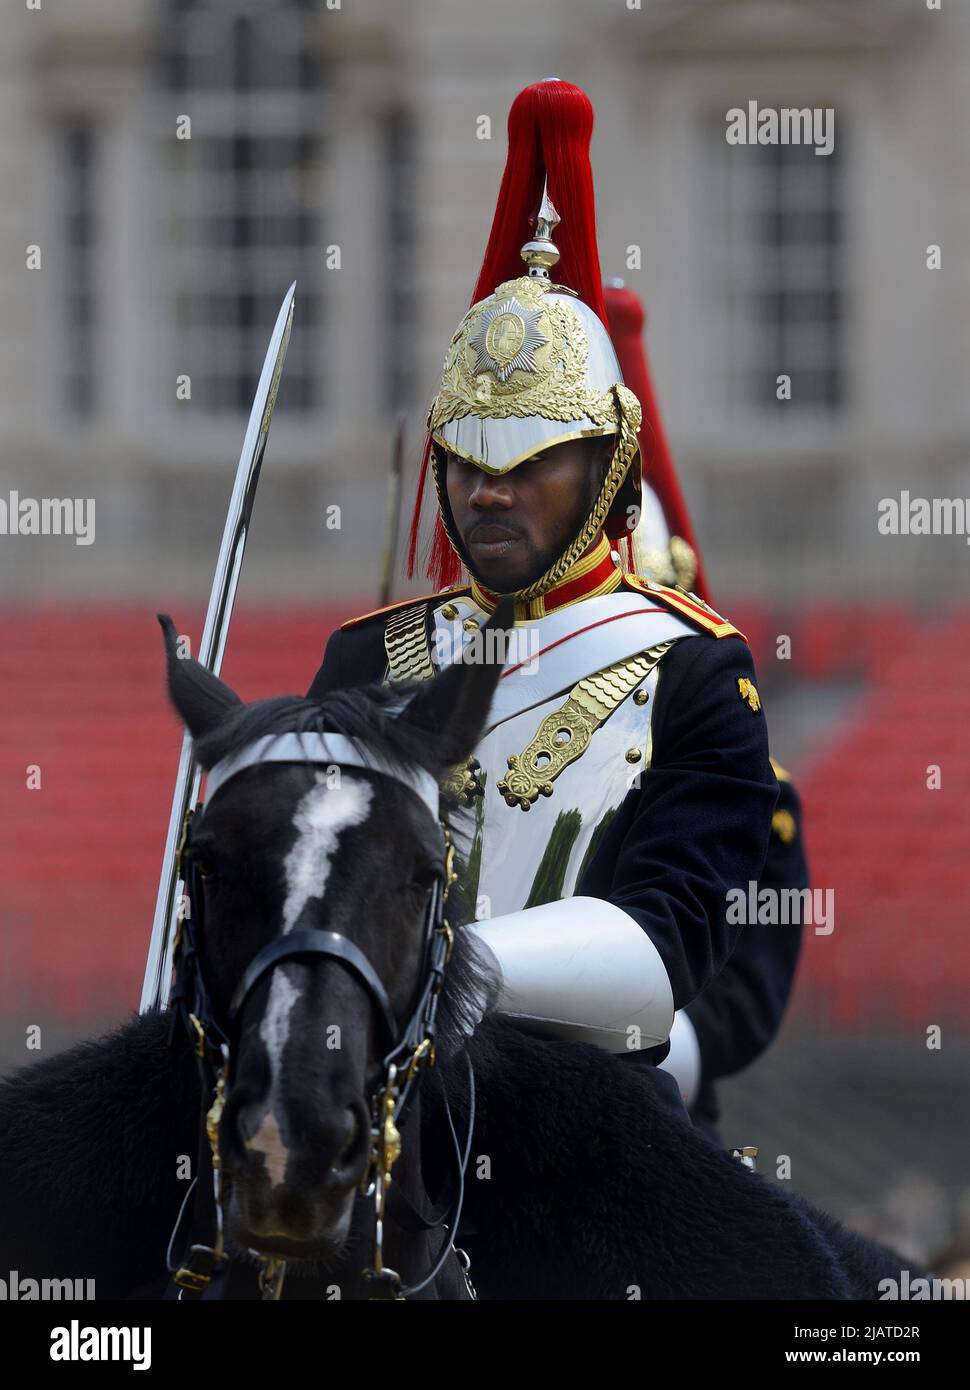 London, England, UK. Daily Changing of the Guard in Horse Guards Parade - black member of the Blues and Royals Stock Photo